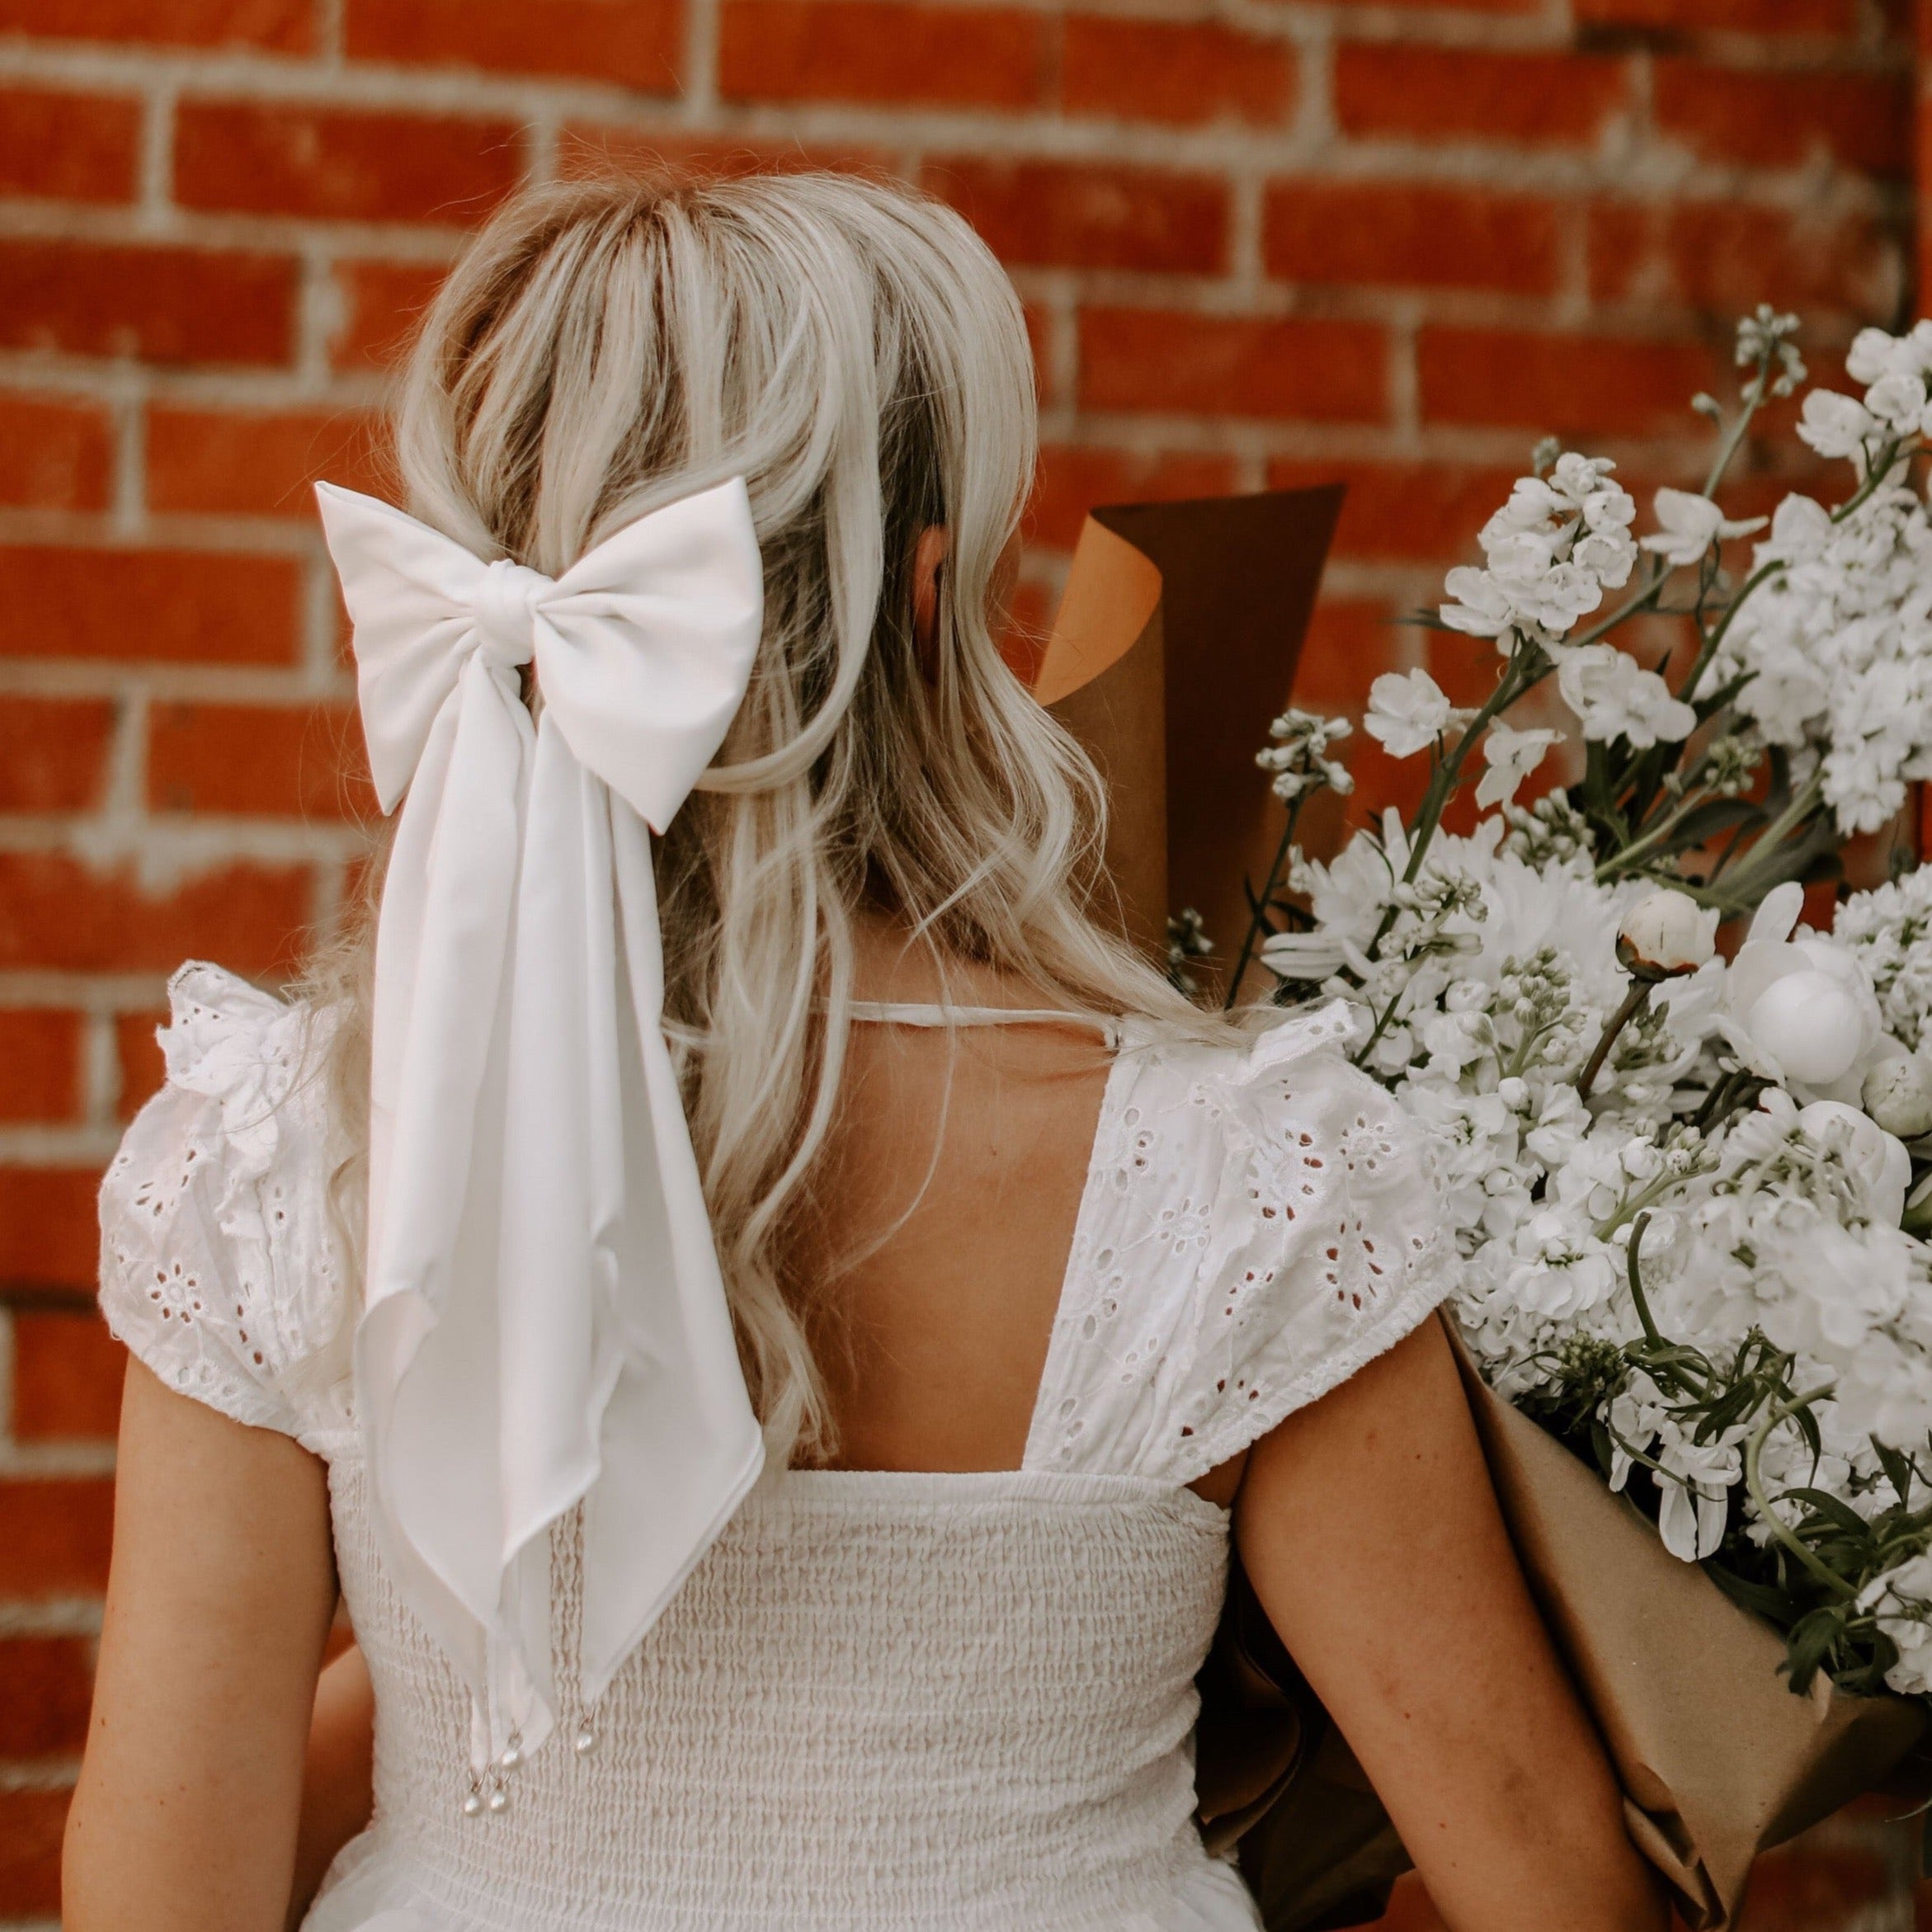 Blonde female facing brick wall with long bridal bow tying hair back half up , half down wearing white shirt and holding bundle of white flowers.